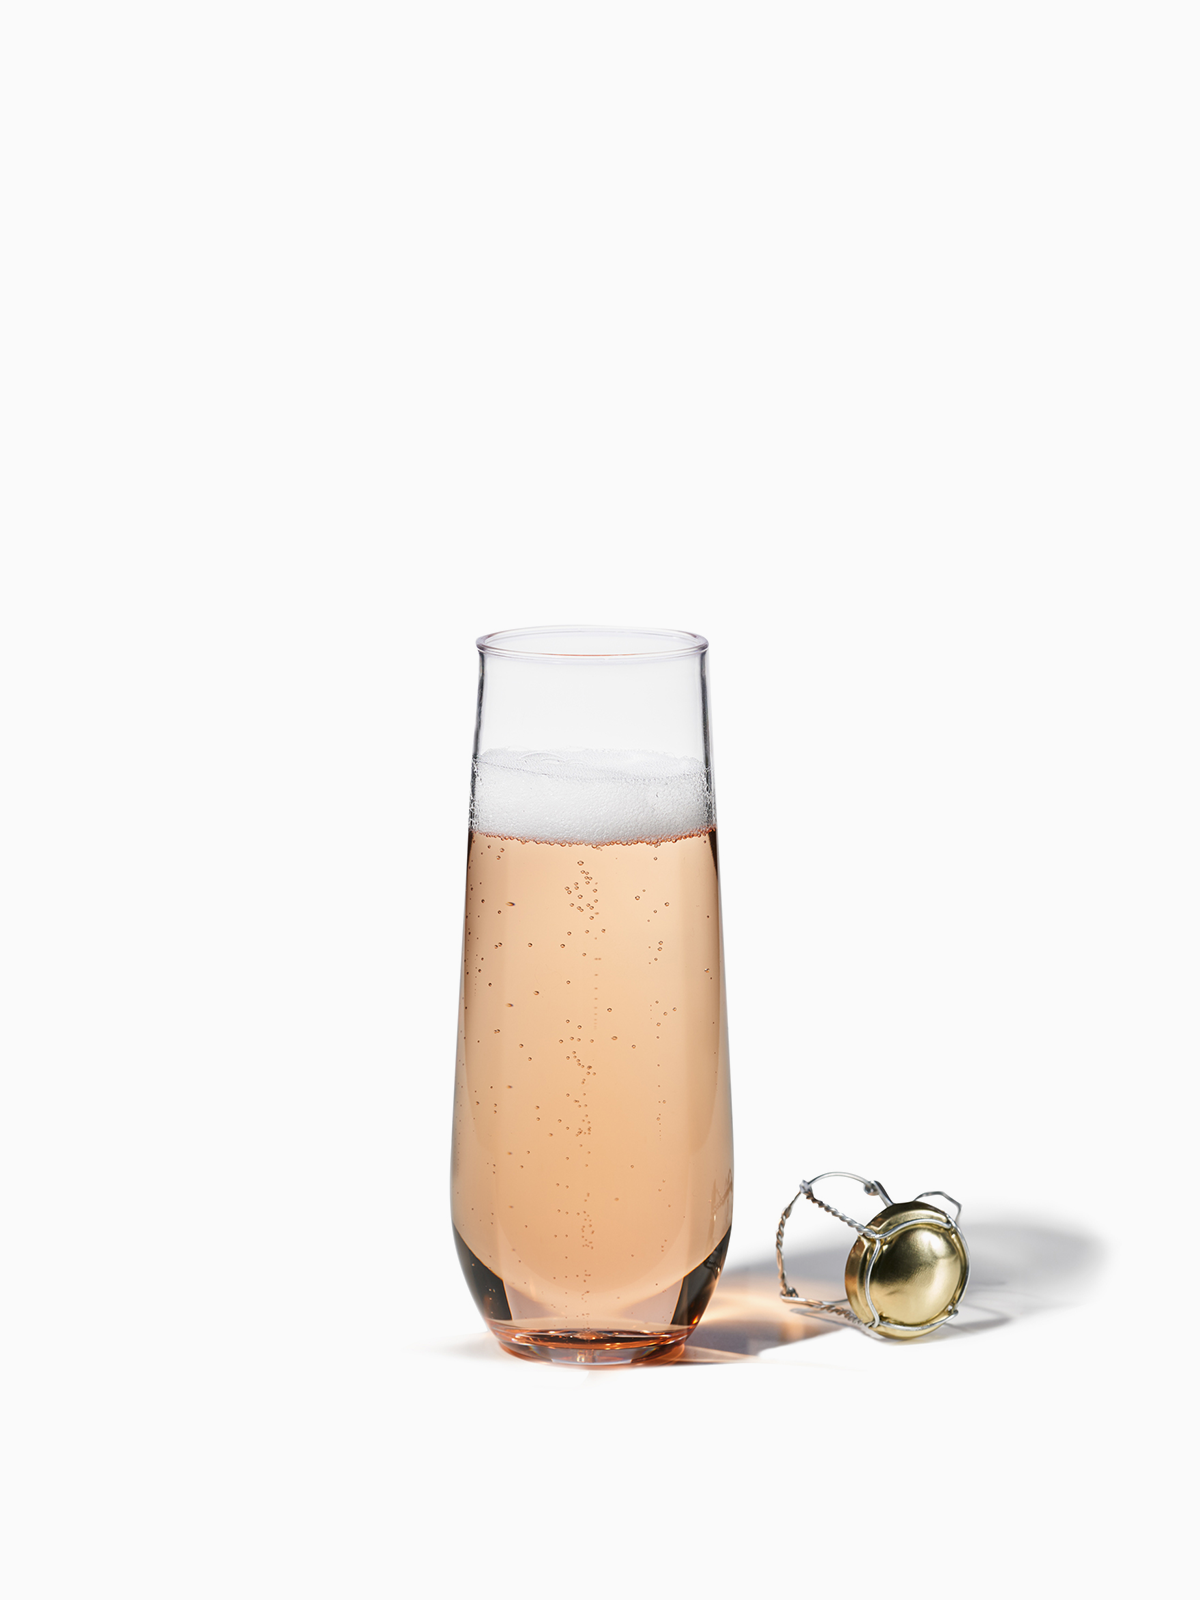 Meoky 9oz Insulated Champagne Flute Tumbler with Flip